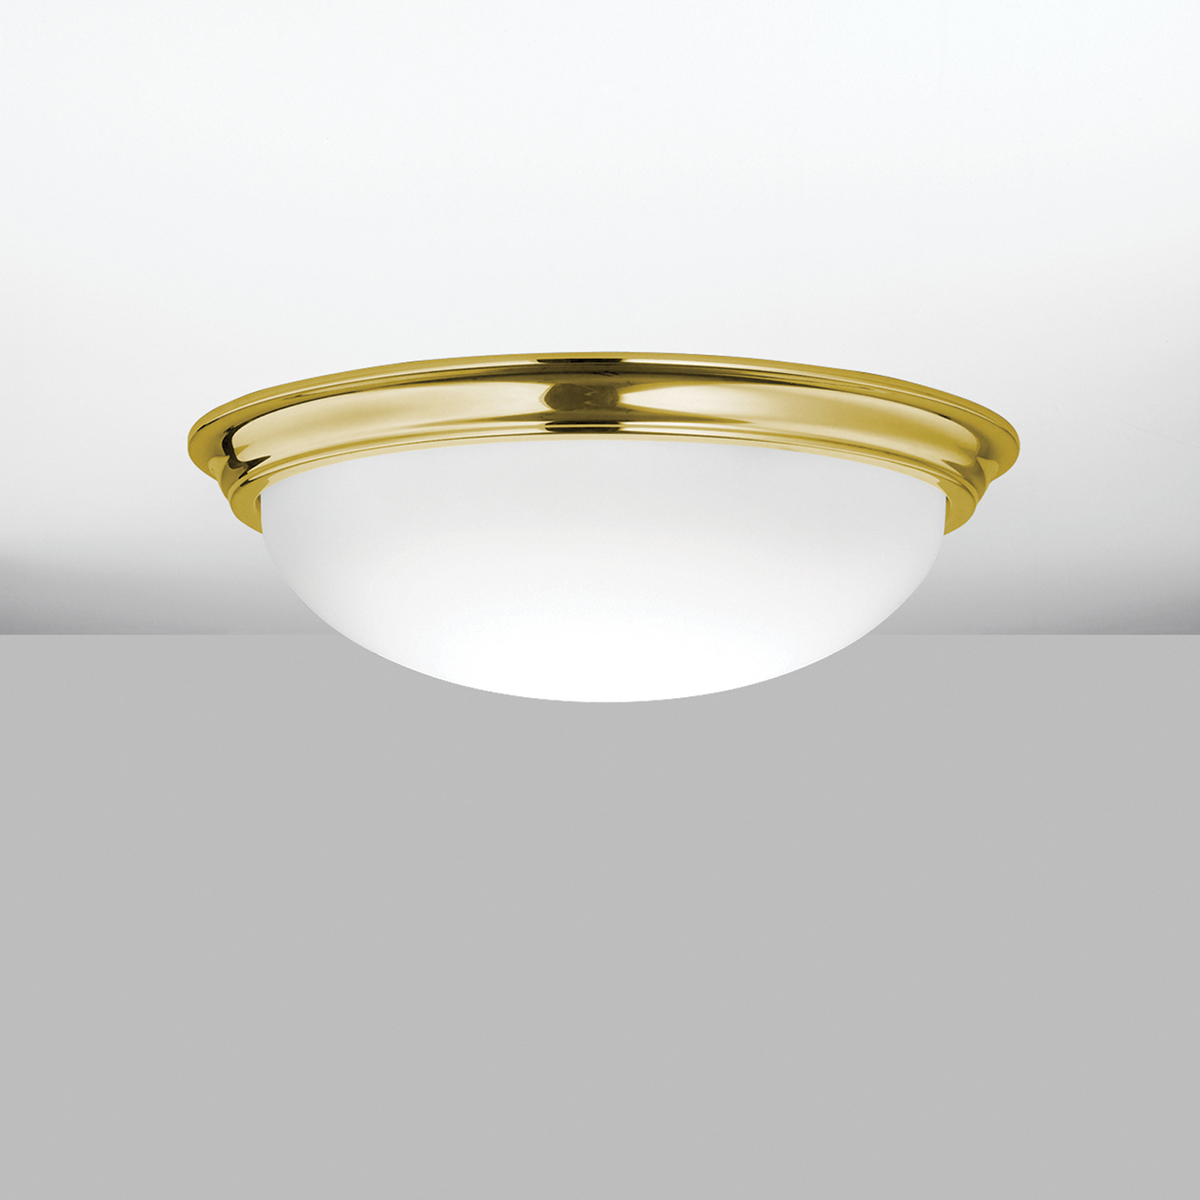 A ceiling-mounted bowl fixture with a shallow luminous bowl